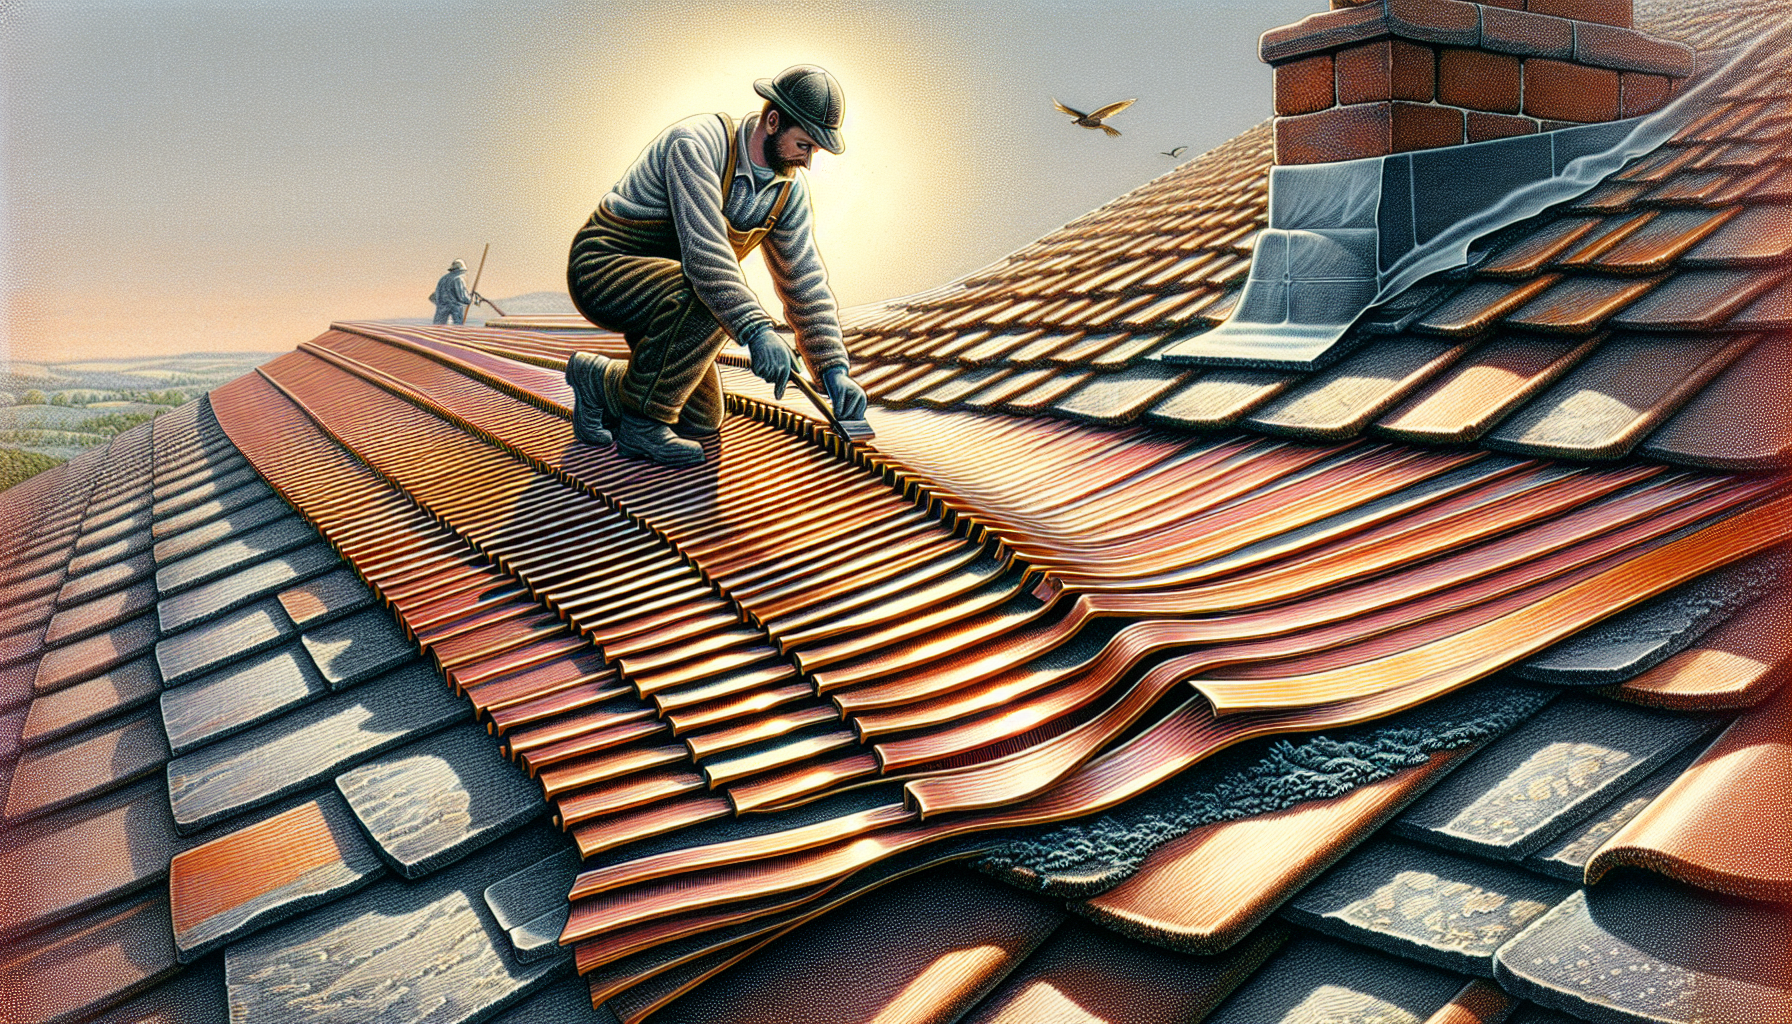 Illustration of installing metal strips on the roof's ridge